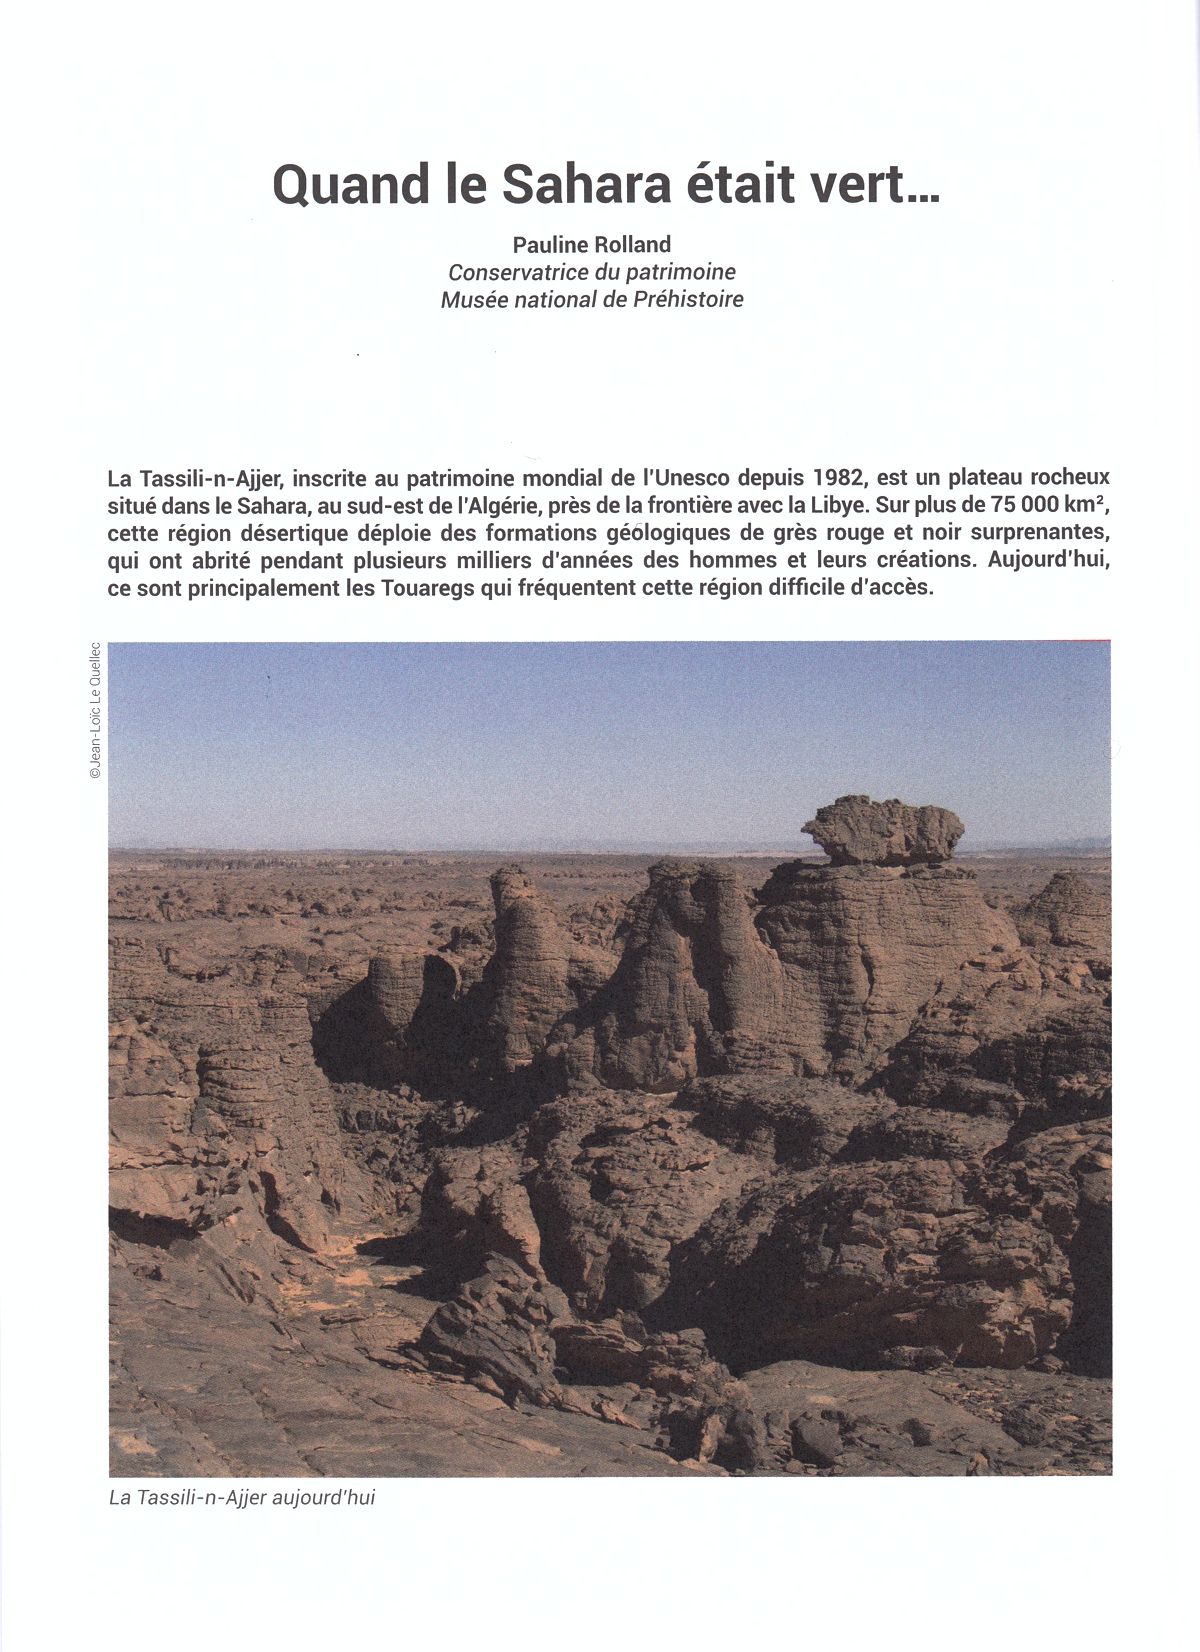 Extract from Pauline Rolland’s* documentary note-book. A note-book inside the comic book « Tassili, une femme libre au Néolithique » by Maadiar et Fréwé, published by la Boîte à Bulles.
* Pauline Rolland is the heritage conservation official at the Musée National de.Préhistoire.